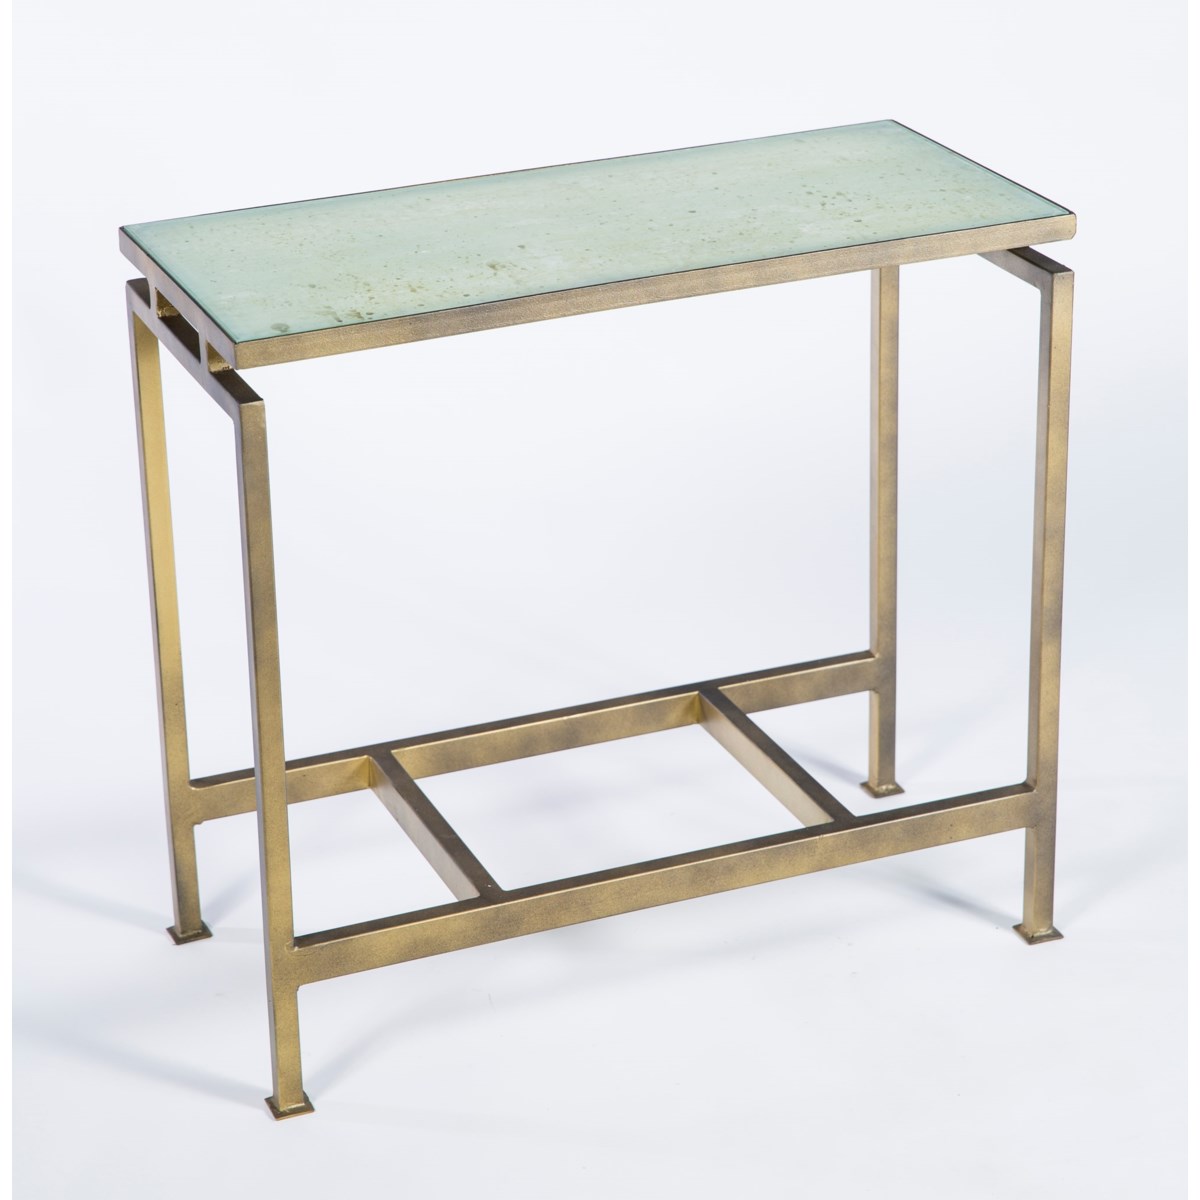 Nelson Accent Table in Antique Bronze with Top in Spiced Cocoa Finish